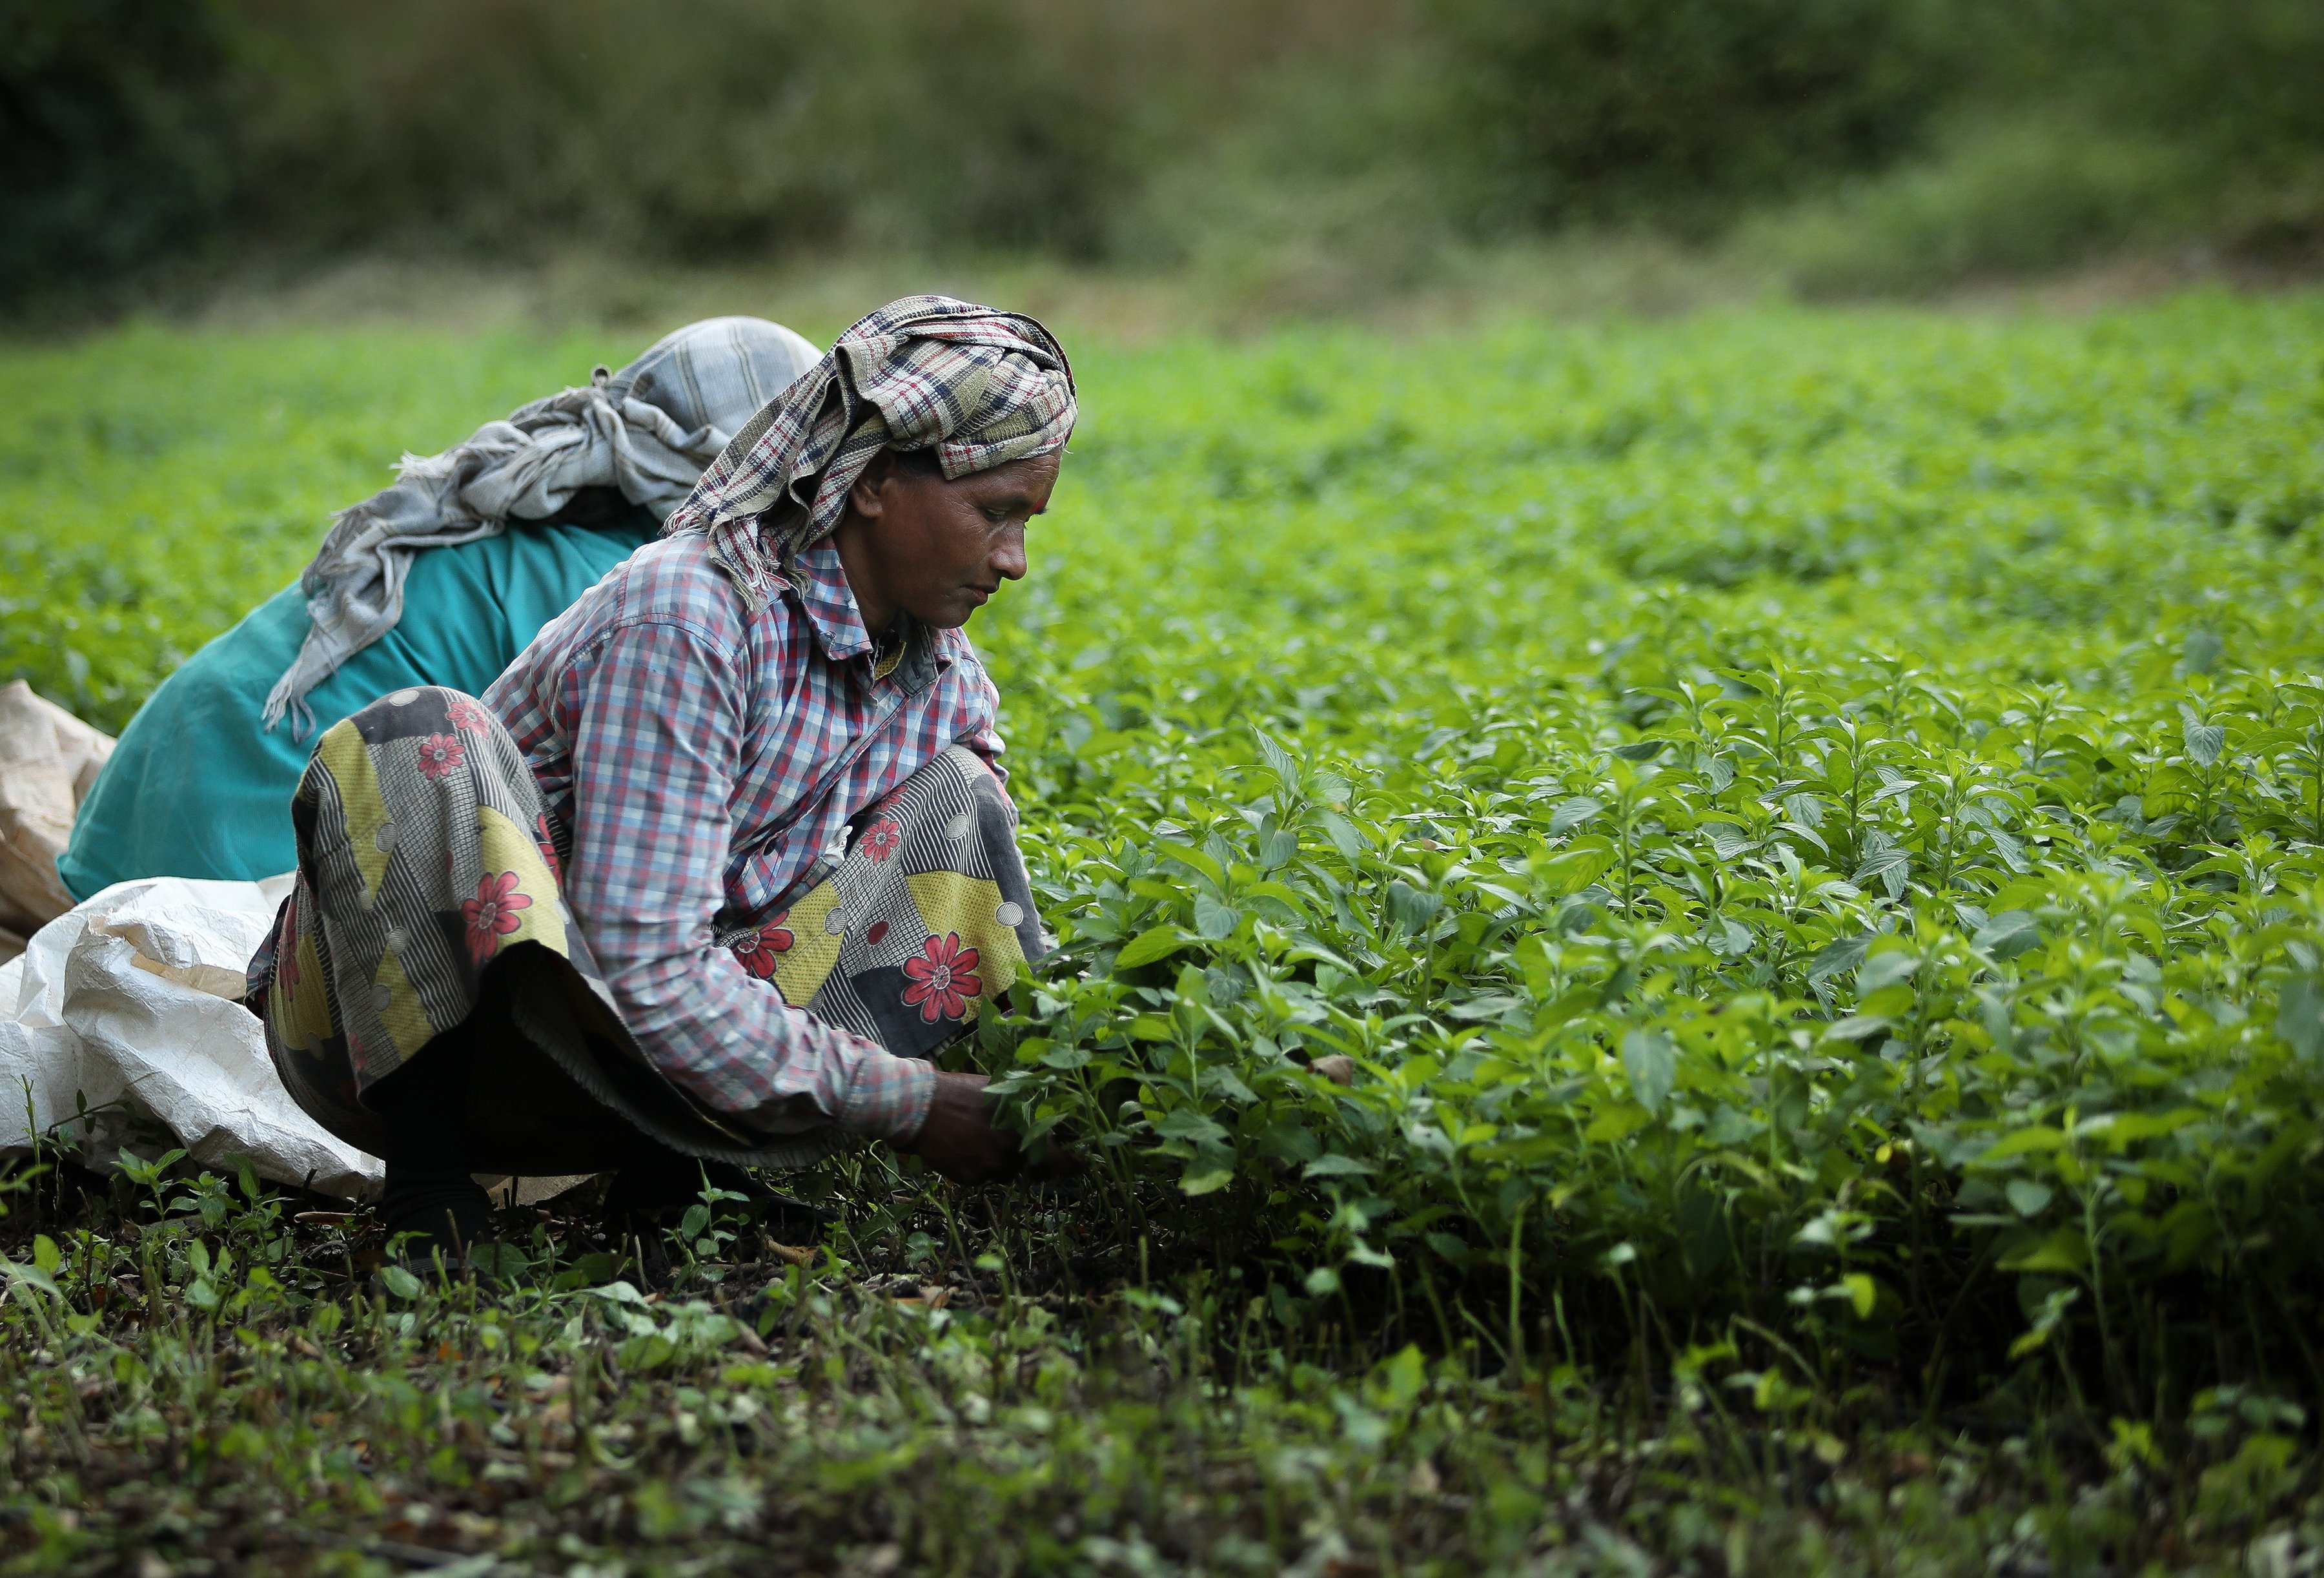 Fair trade practices are beneficial to farmers and their families by allowing them to invest in themselves and their communities. These women are tending to a crop in India where their families and communities benefit from fair trade practices. 